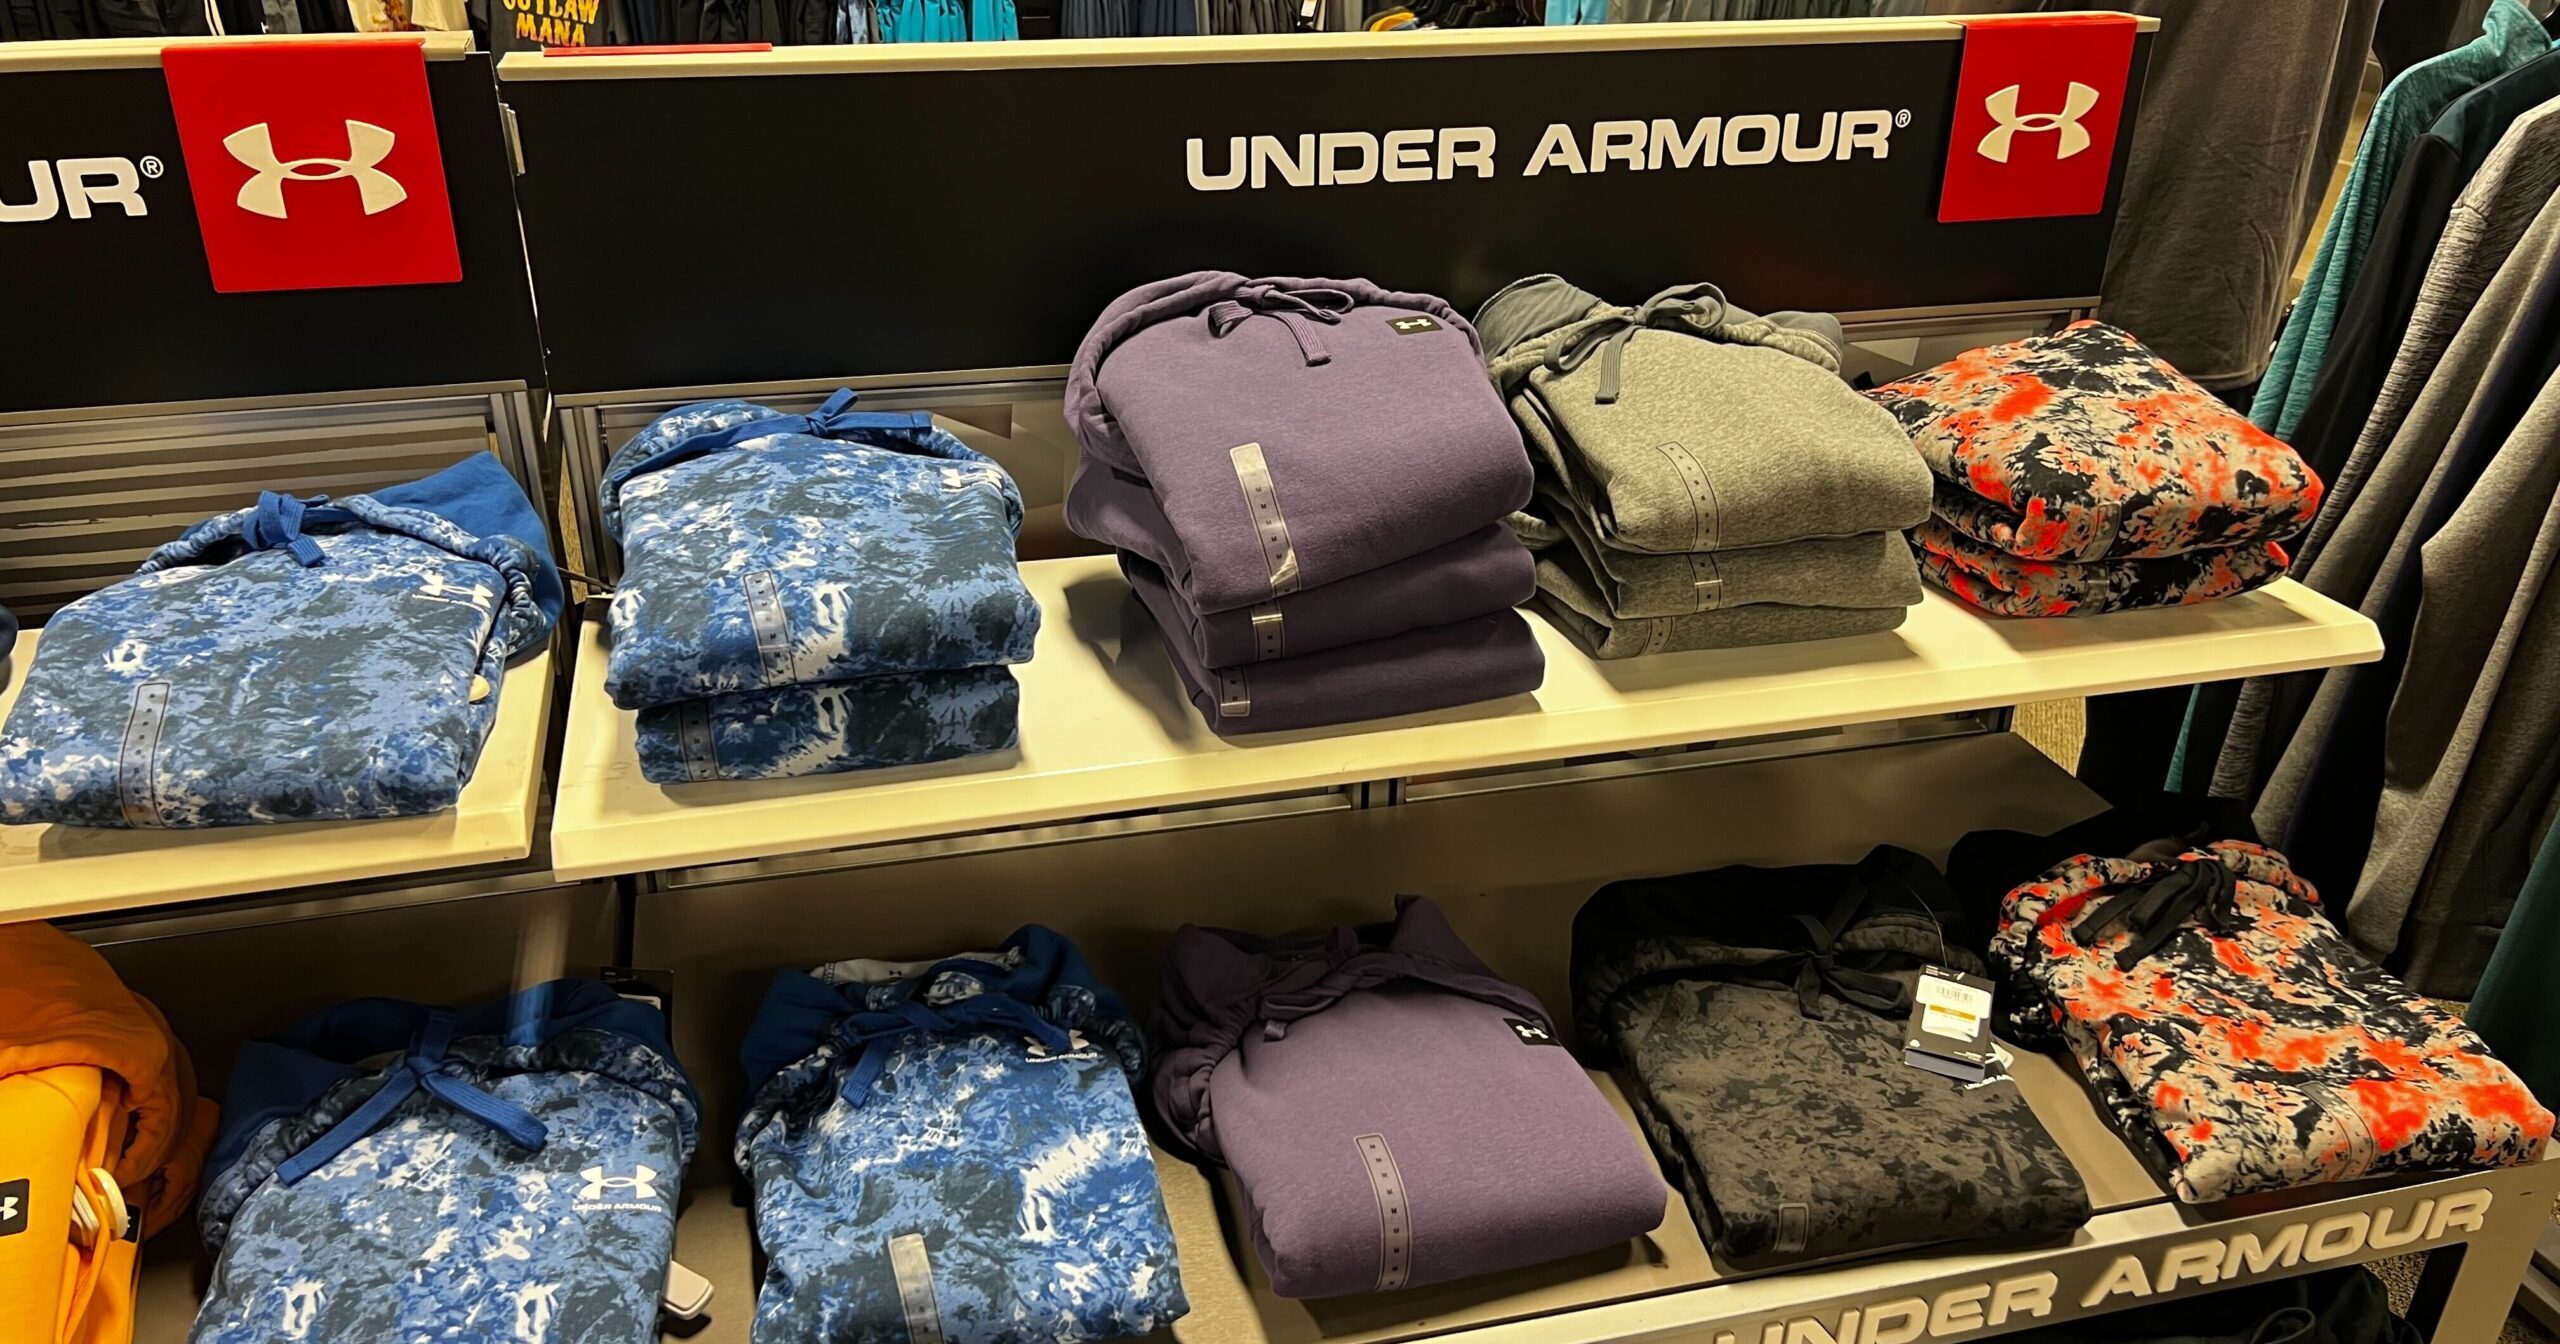 Under Armour Outlet - Buy Save 25% Off 1 Item, 30% Off 2 Items and 35% Off 3 Items The Freebie Guy®